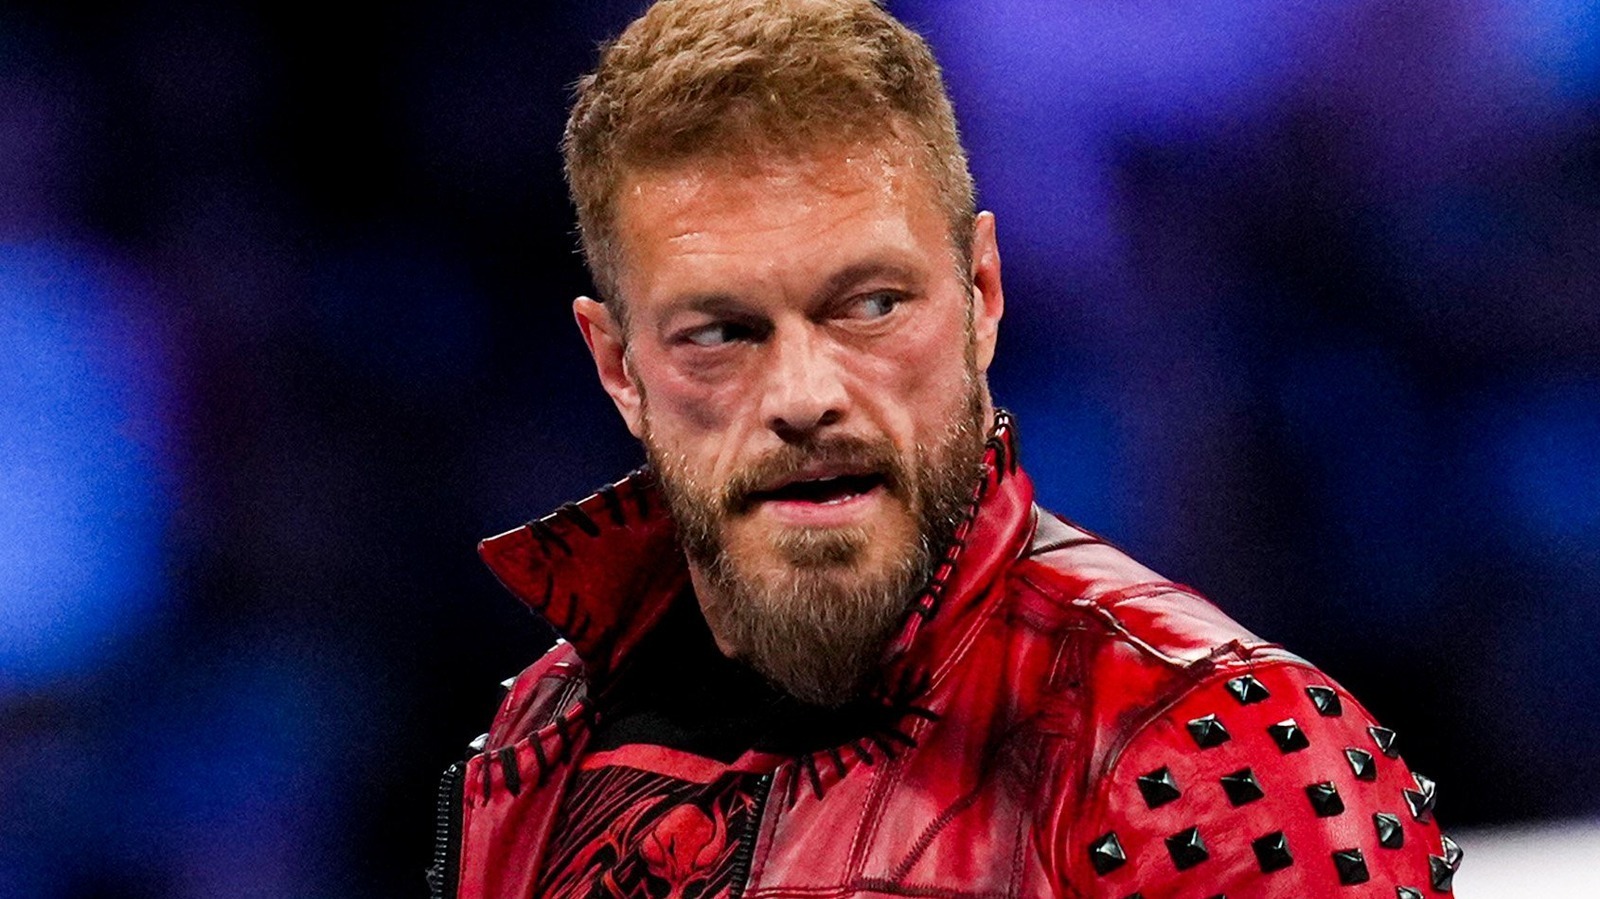 WWE superstar Edge set for retirement match in Toronto on